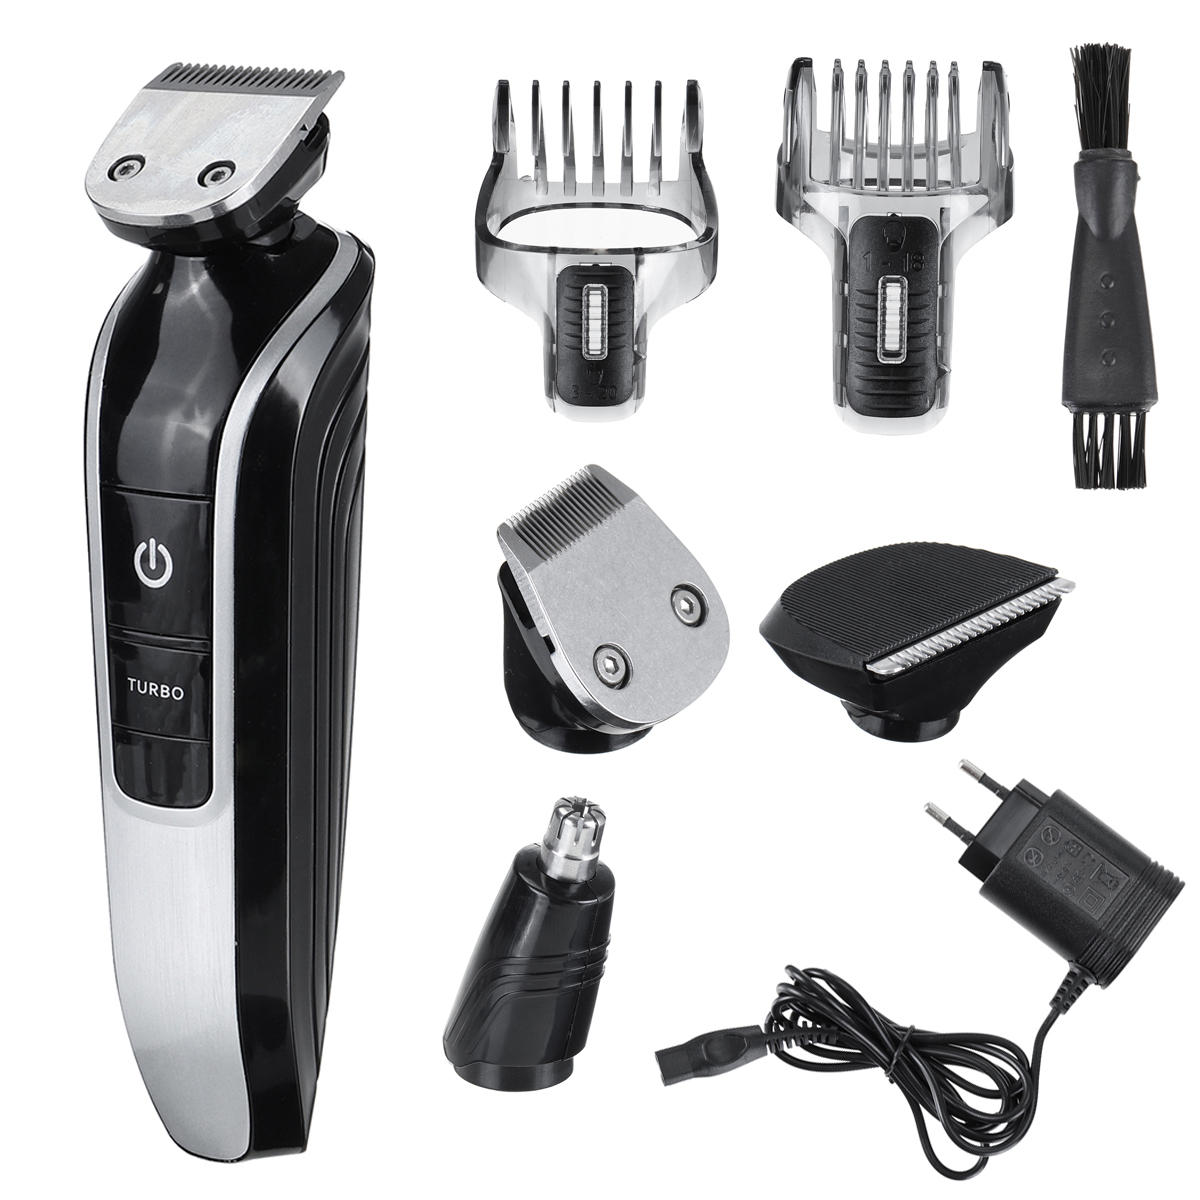 

Washable Beard Trimmer 5 in 1 Hair Clipper Electric Trimmer Shaver Nose Trimmer Electric Razor Grooming Kit